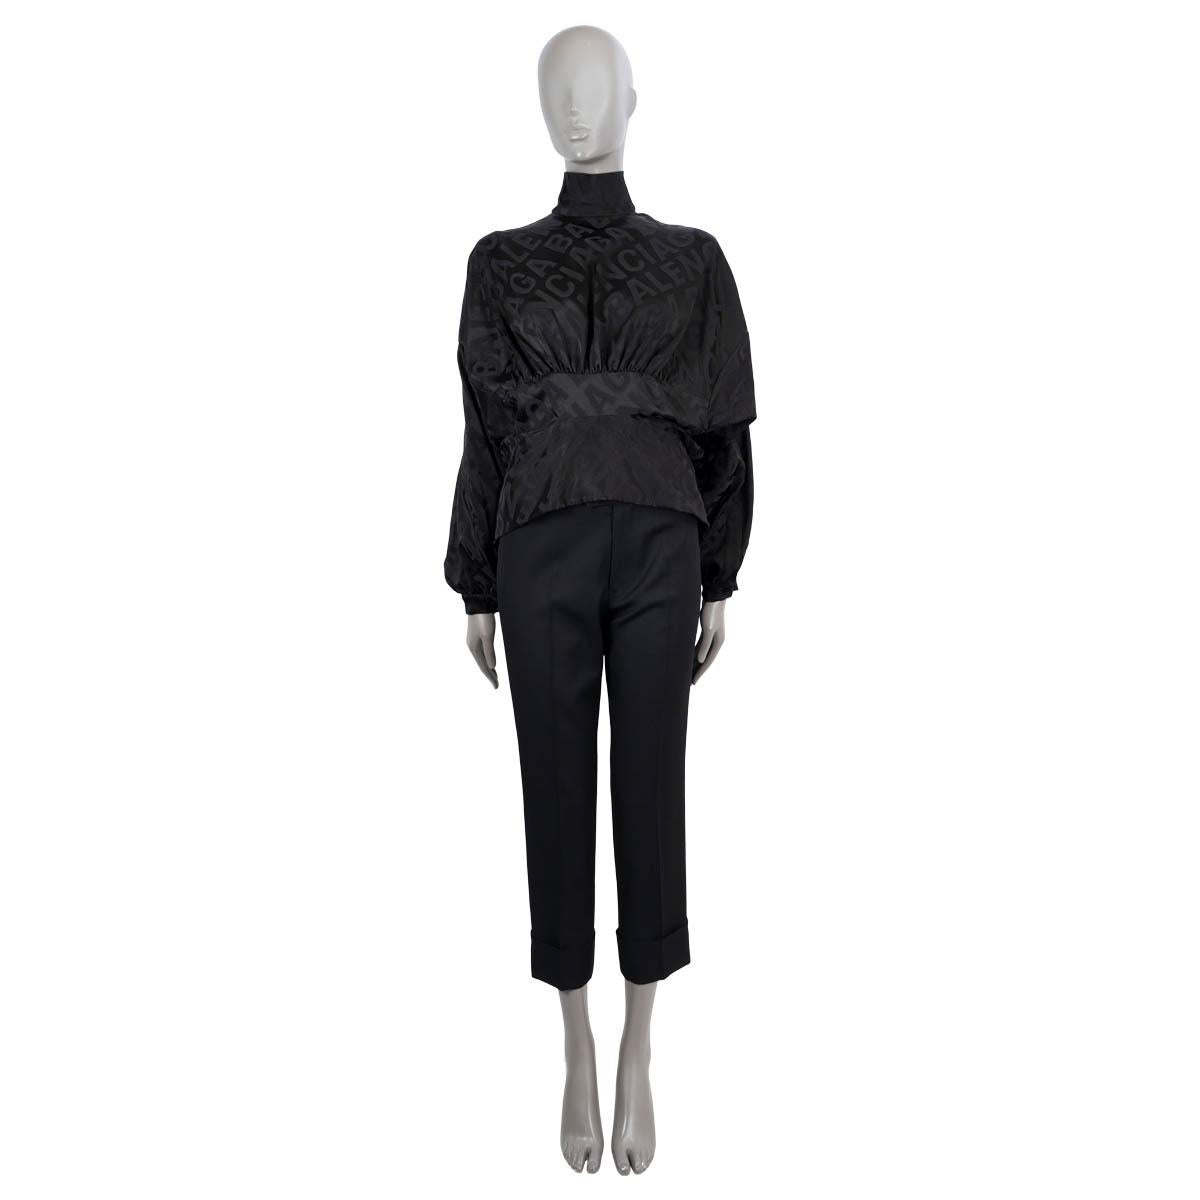 100% authentic Balenciaga all-over logo jacquard satin blouse in black viscose (54%), polyester (34%) and elastane (2%). Features a high-neck, cinched details at the front and back. Self-ties at the back. Opens with a zipper in the back. Unlined.